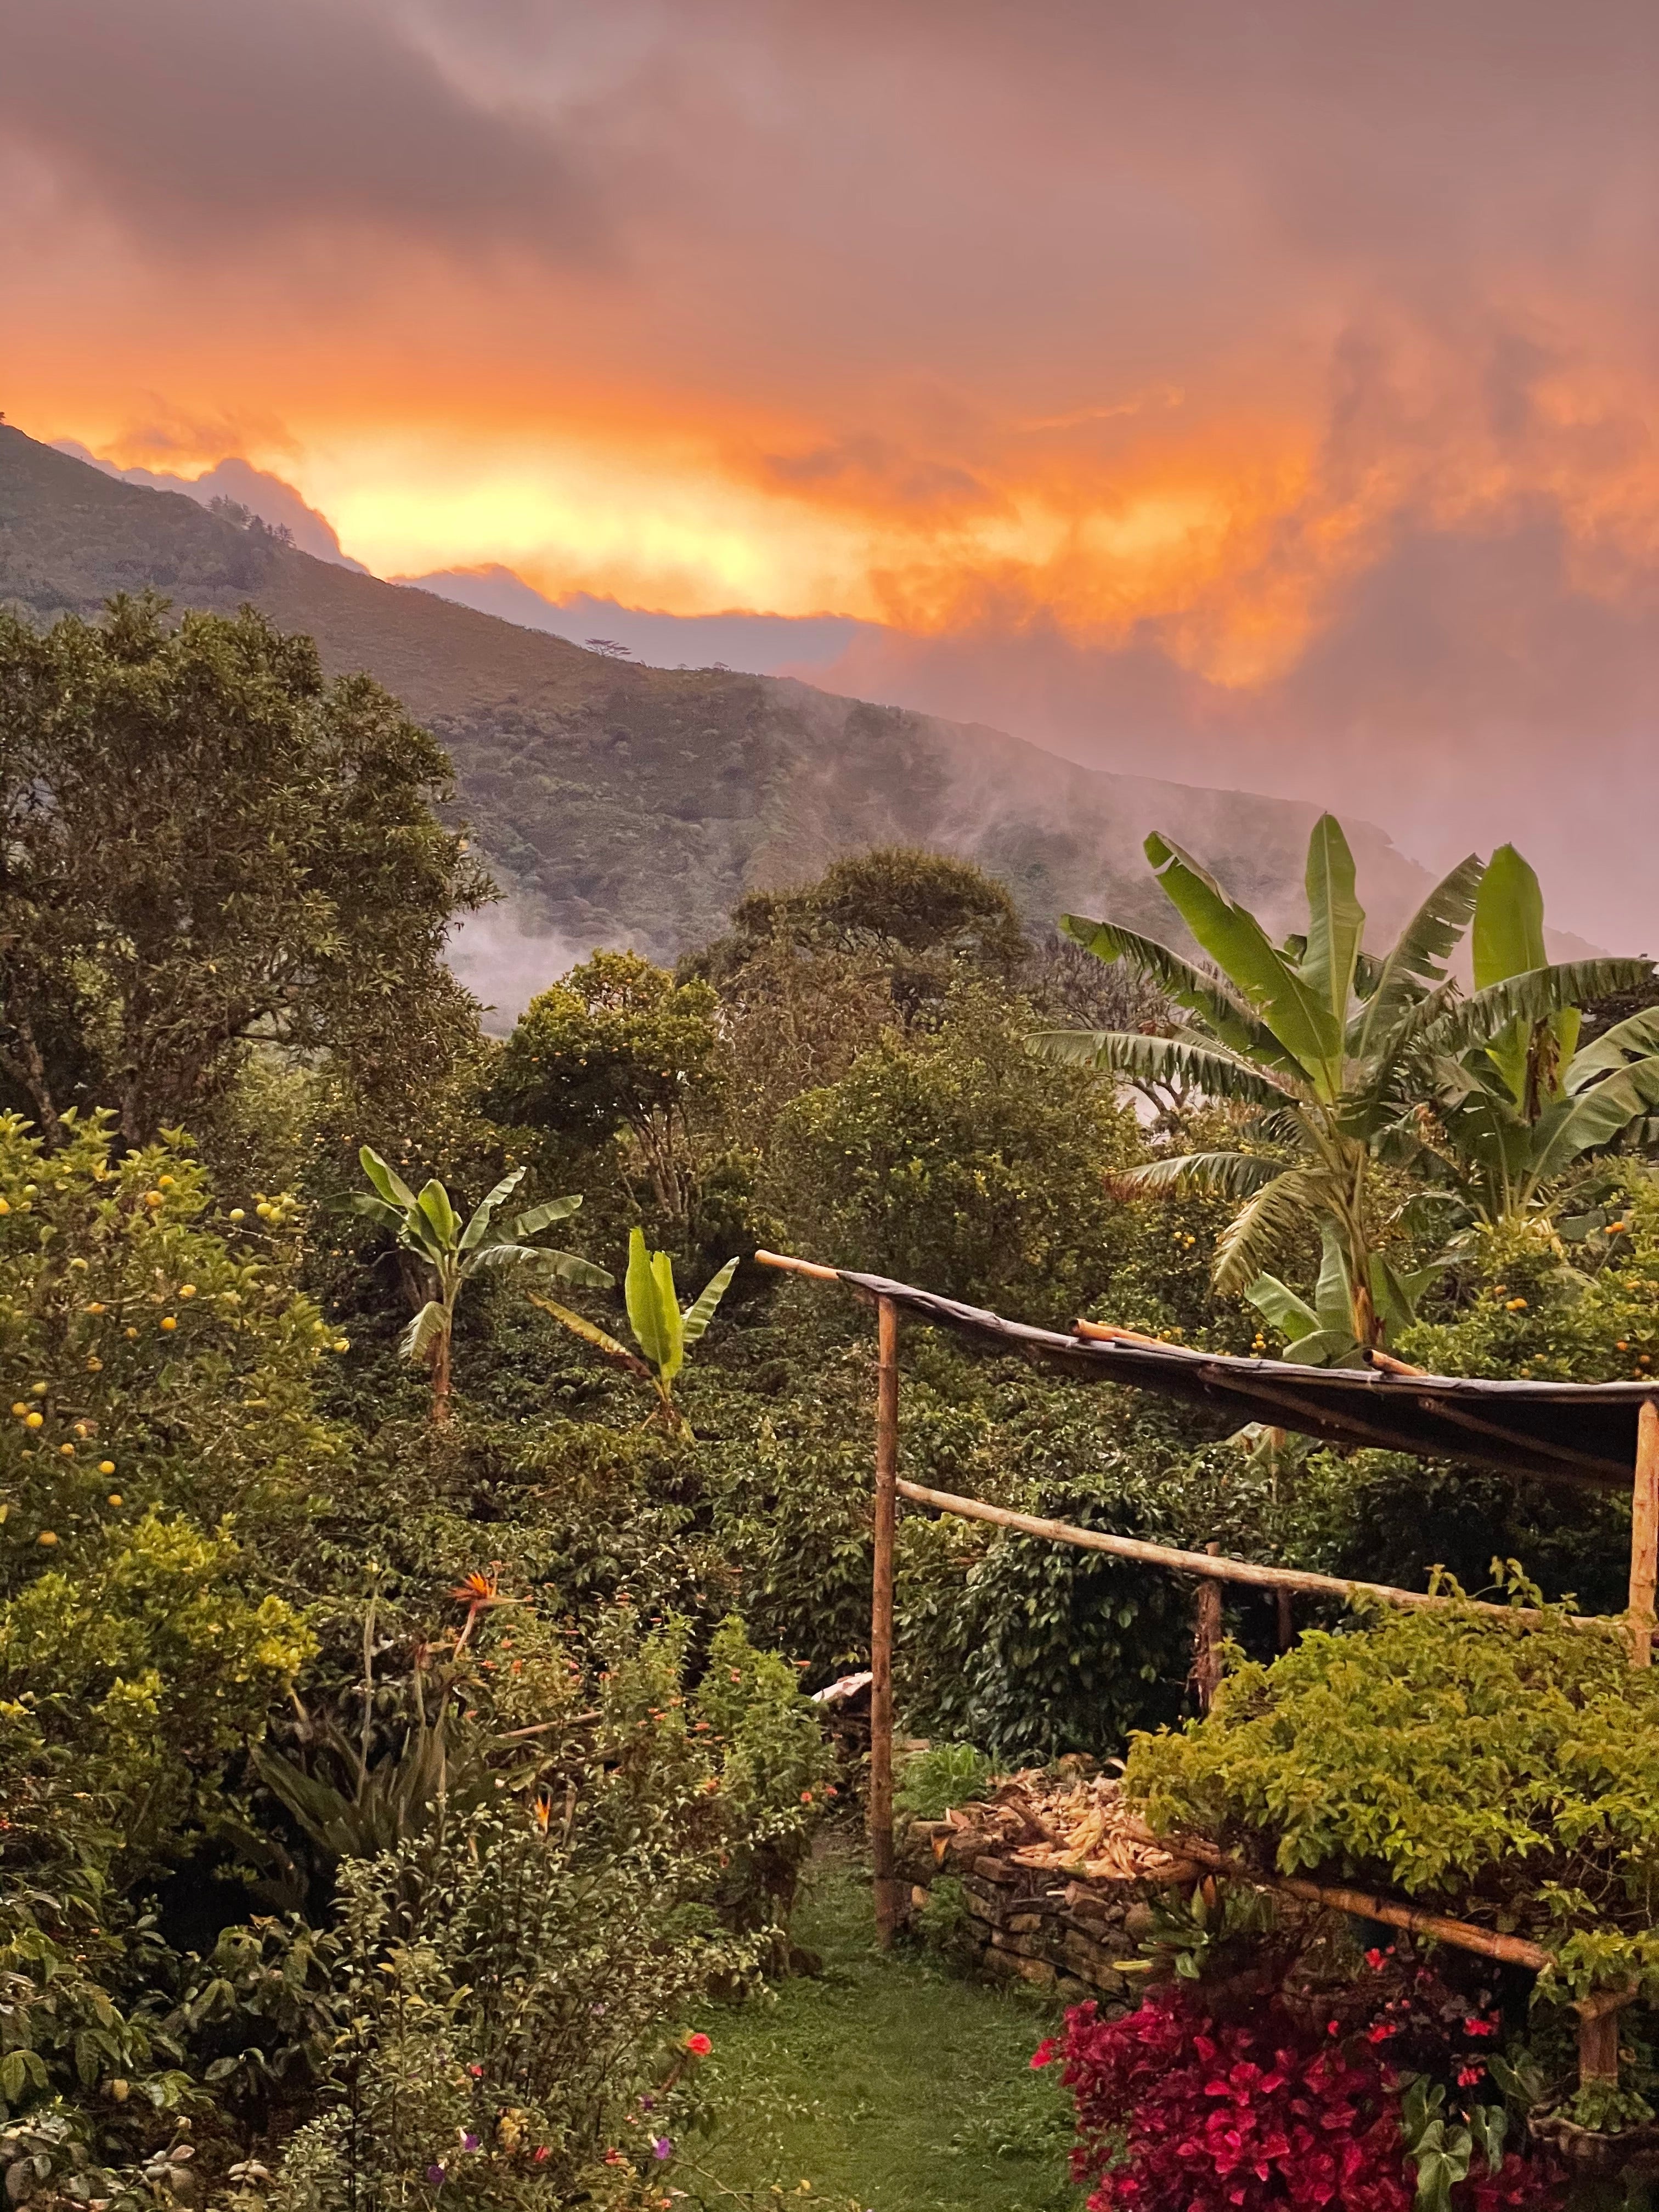 Rewarding view after a long day at the coffee farm. Argote Specialty Coffee - Génova, Nariño, Colombia.